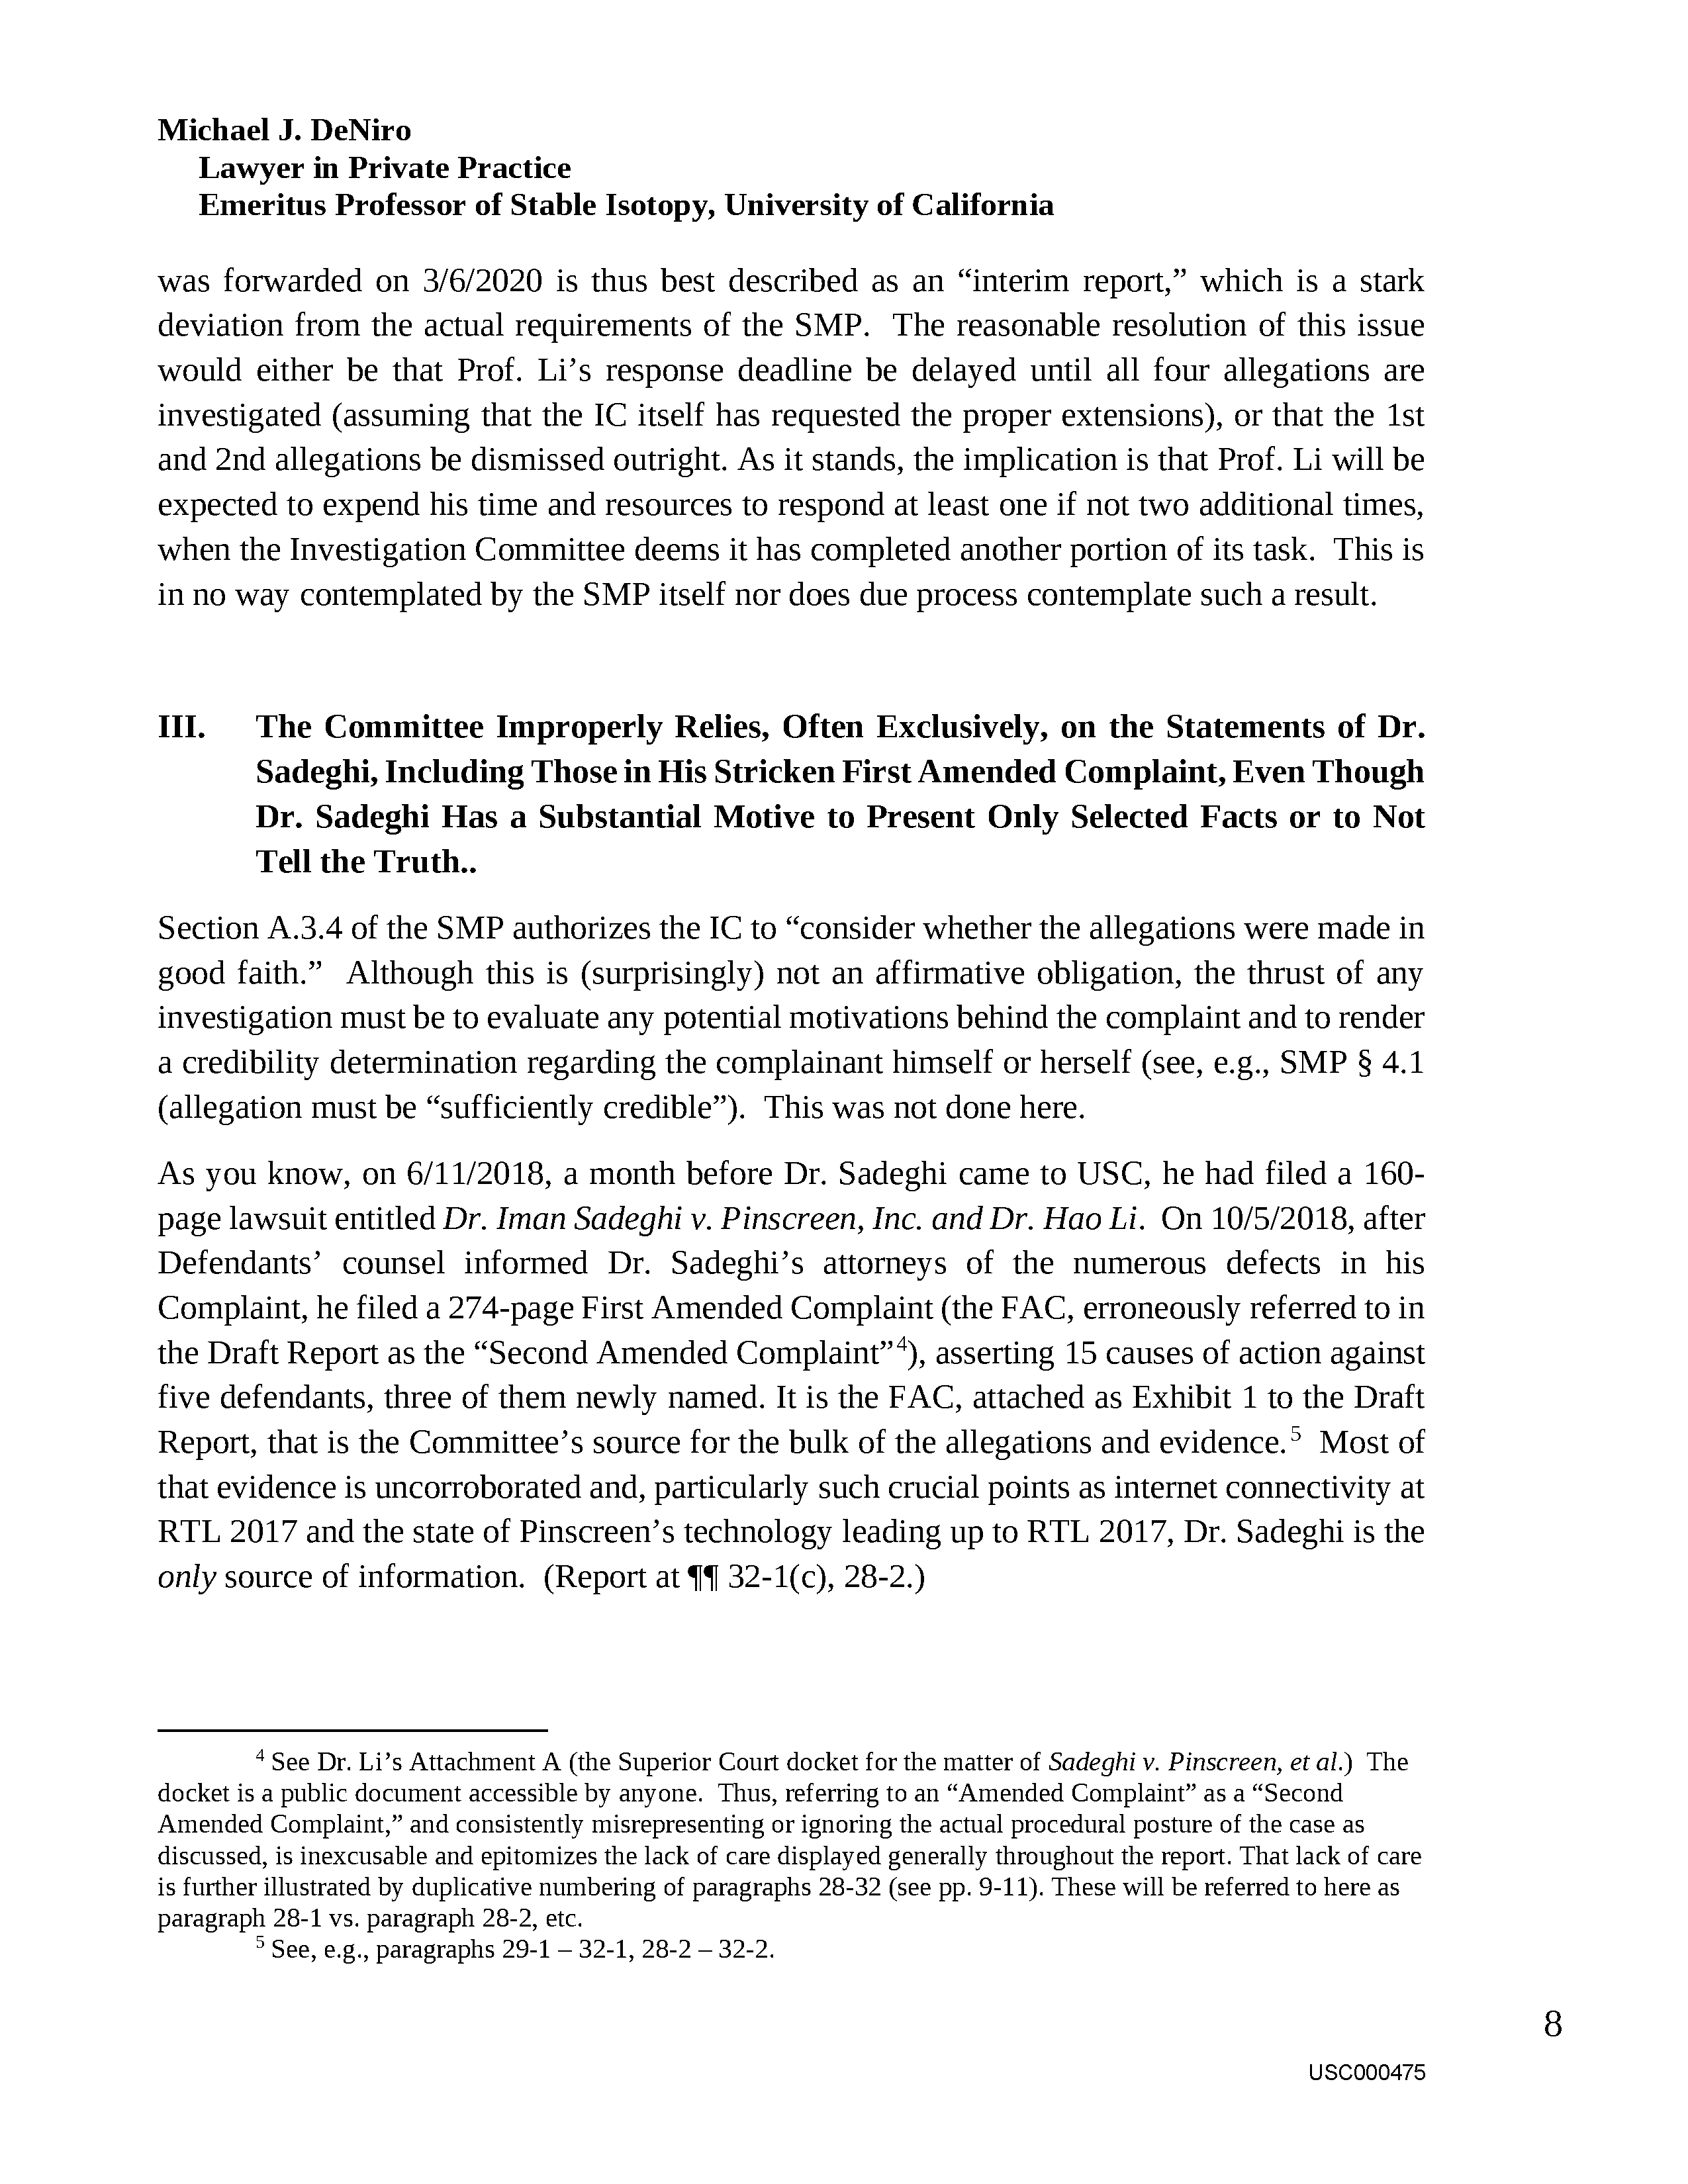 USC's Investigation Report re Hao Li's and Pinscreen's Scientific Misconduct at ACM SIGGRAPH RTL 2017 - Full Report Page 477